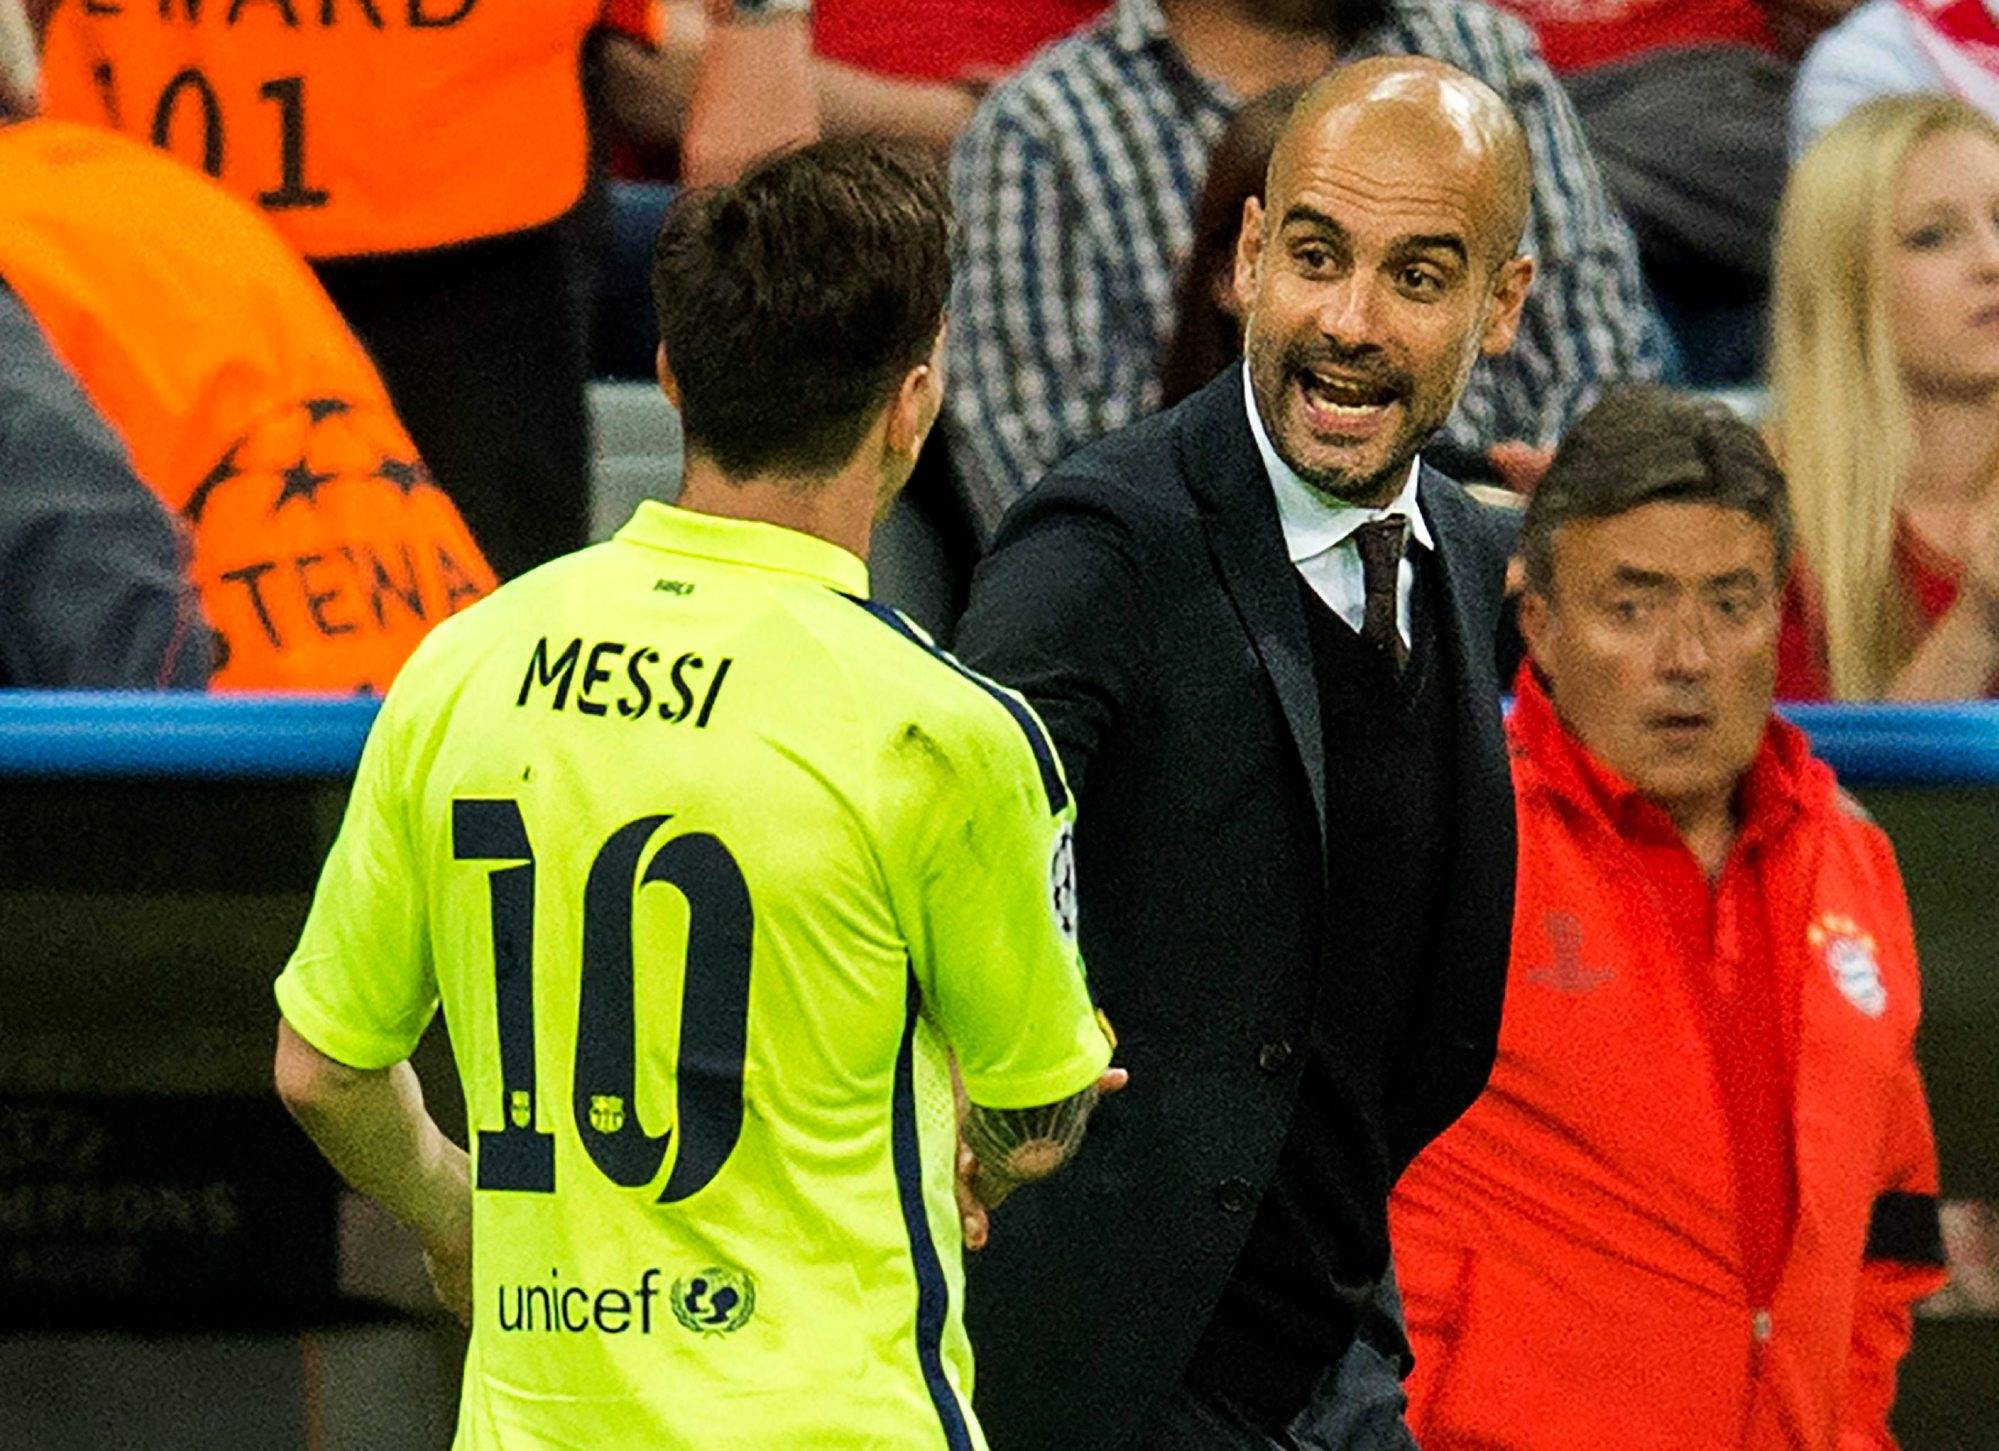 Messi the greatest of all times: Pep Guardiola